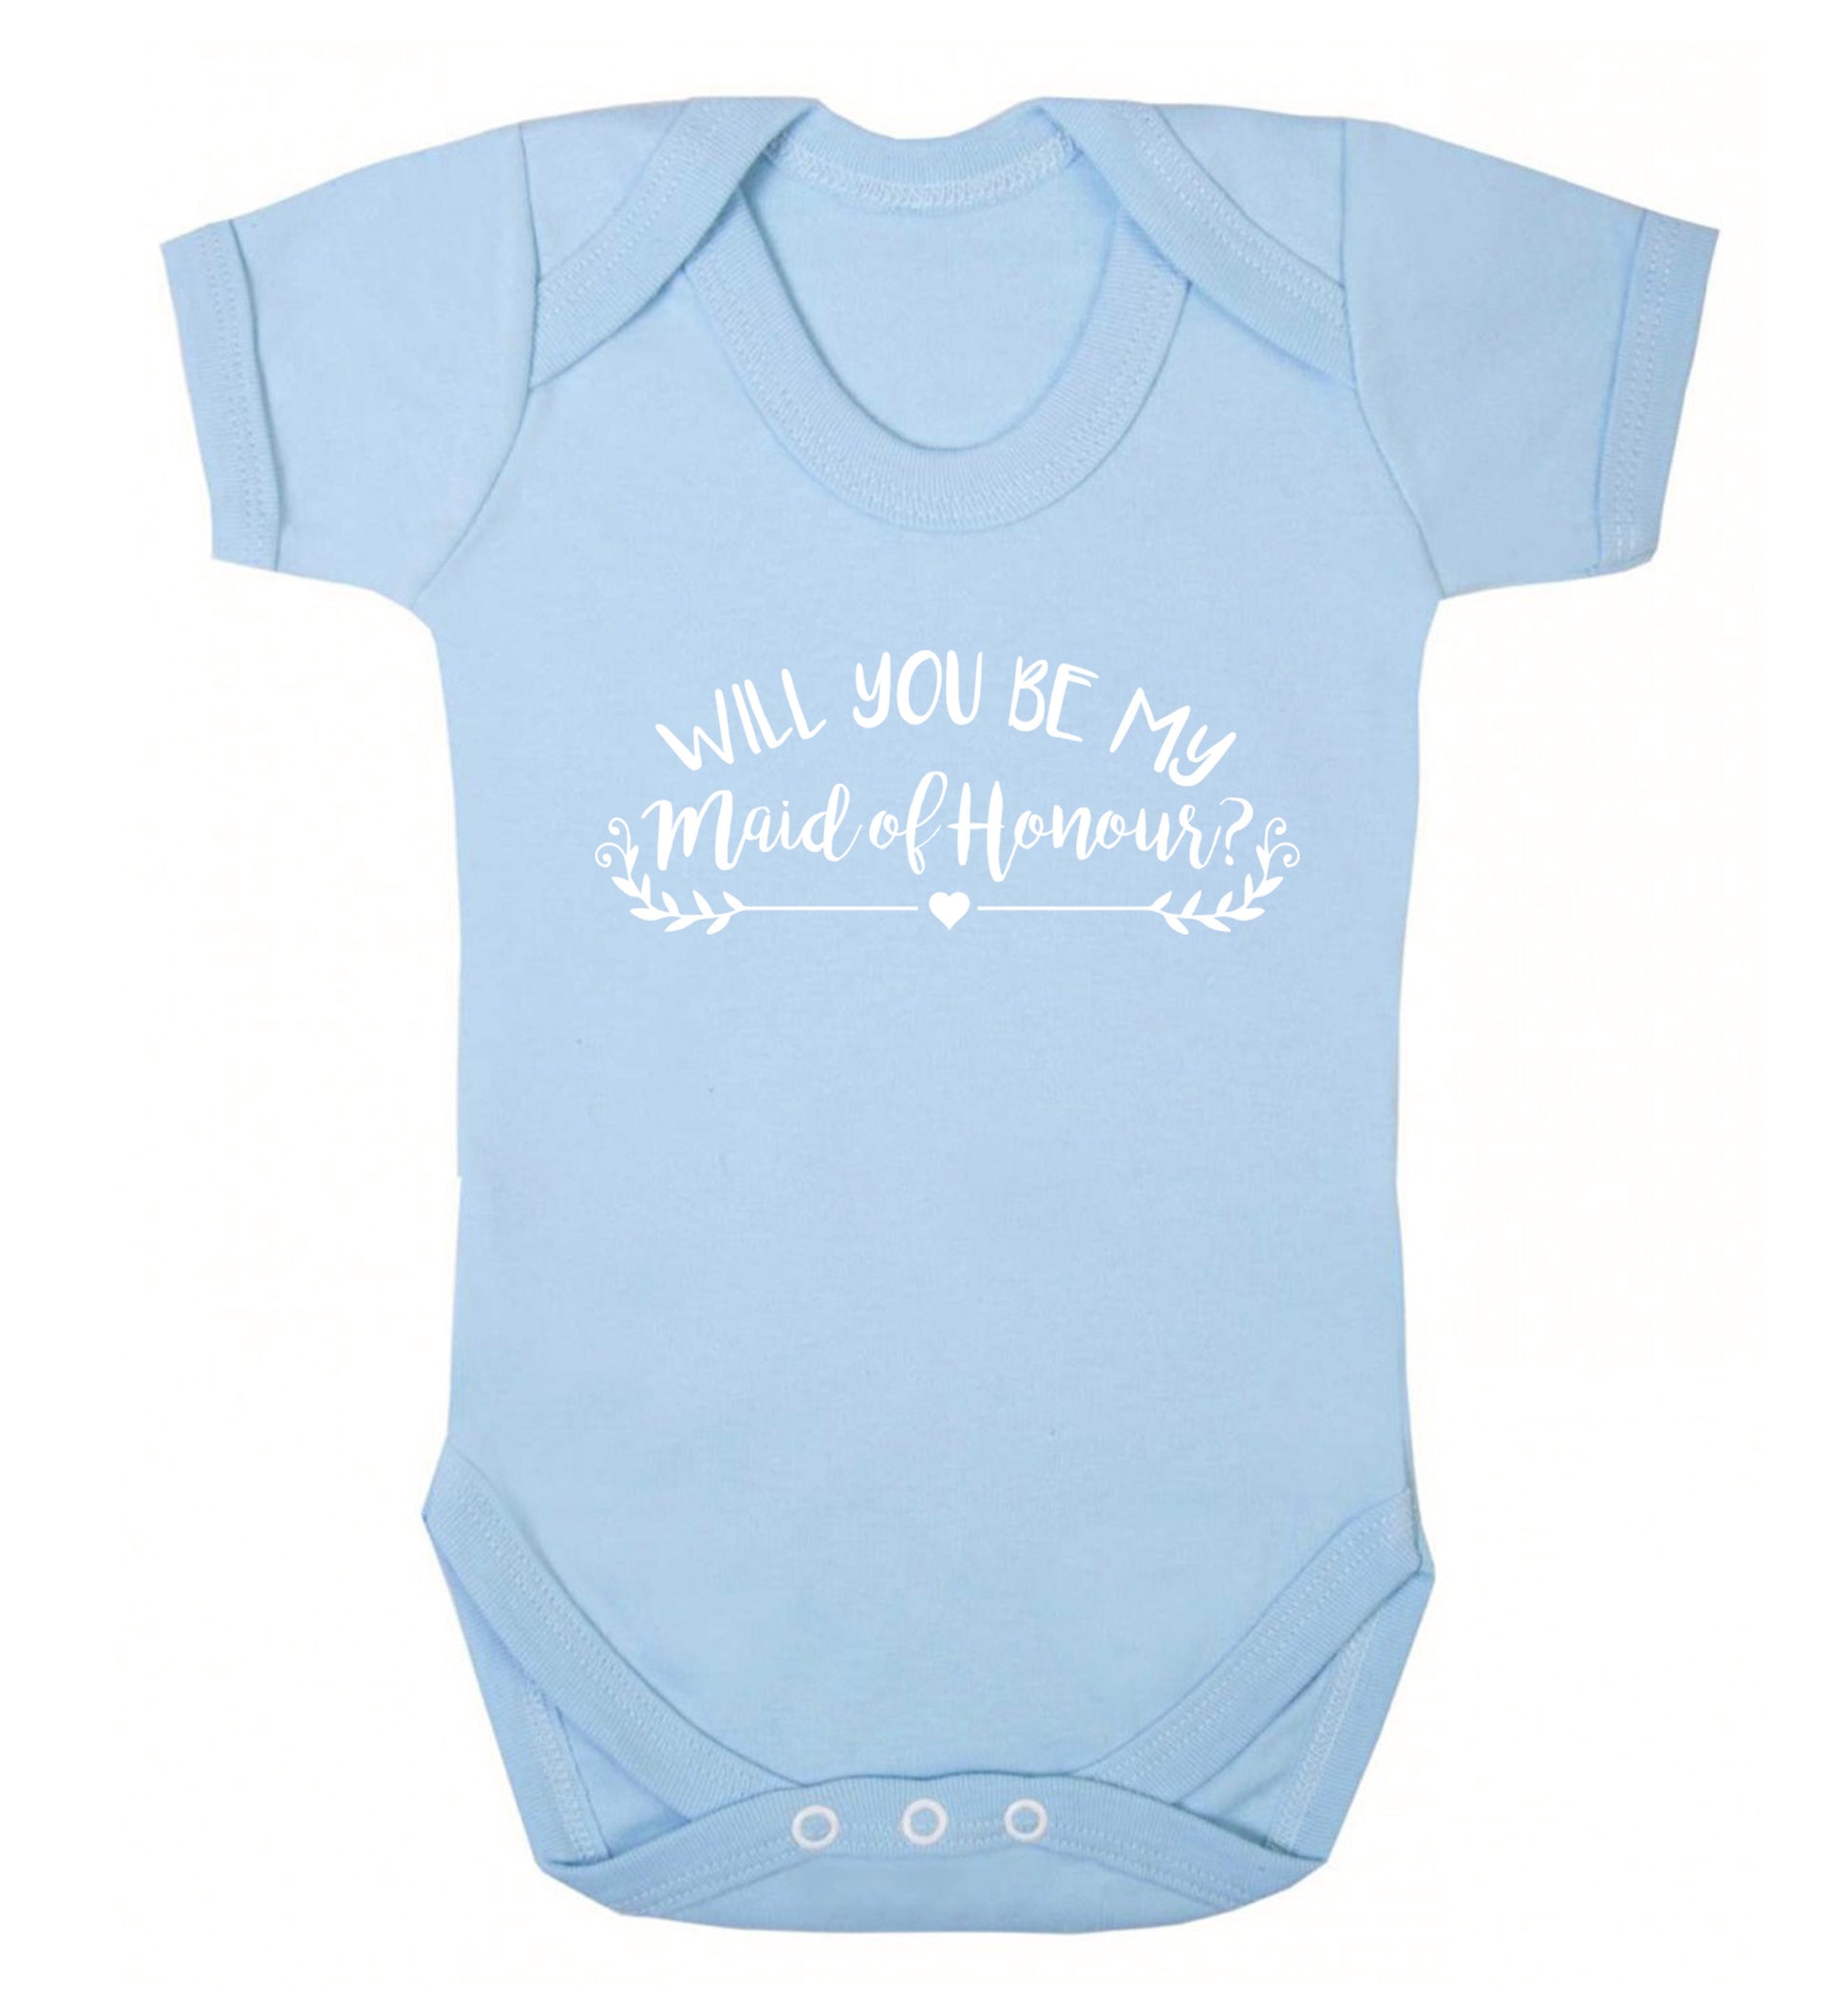 Will you be my maid of honour? Baby Vest pale blue 18-24 months